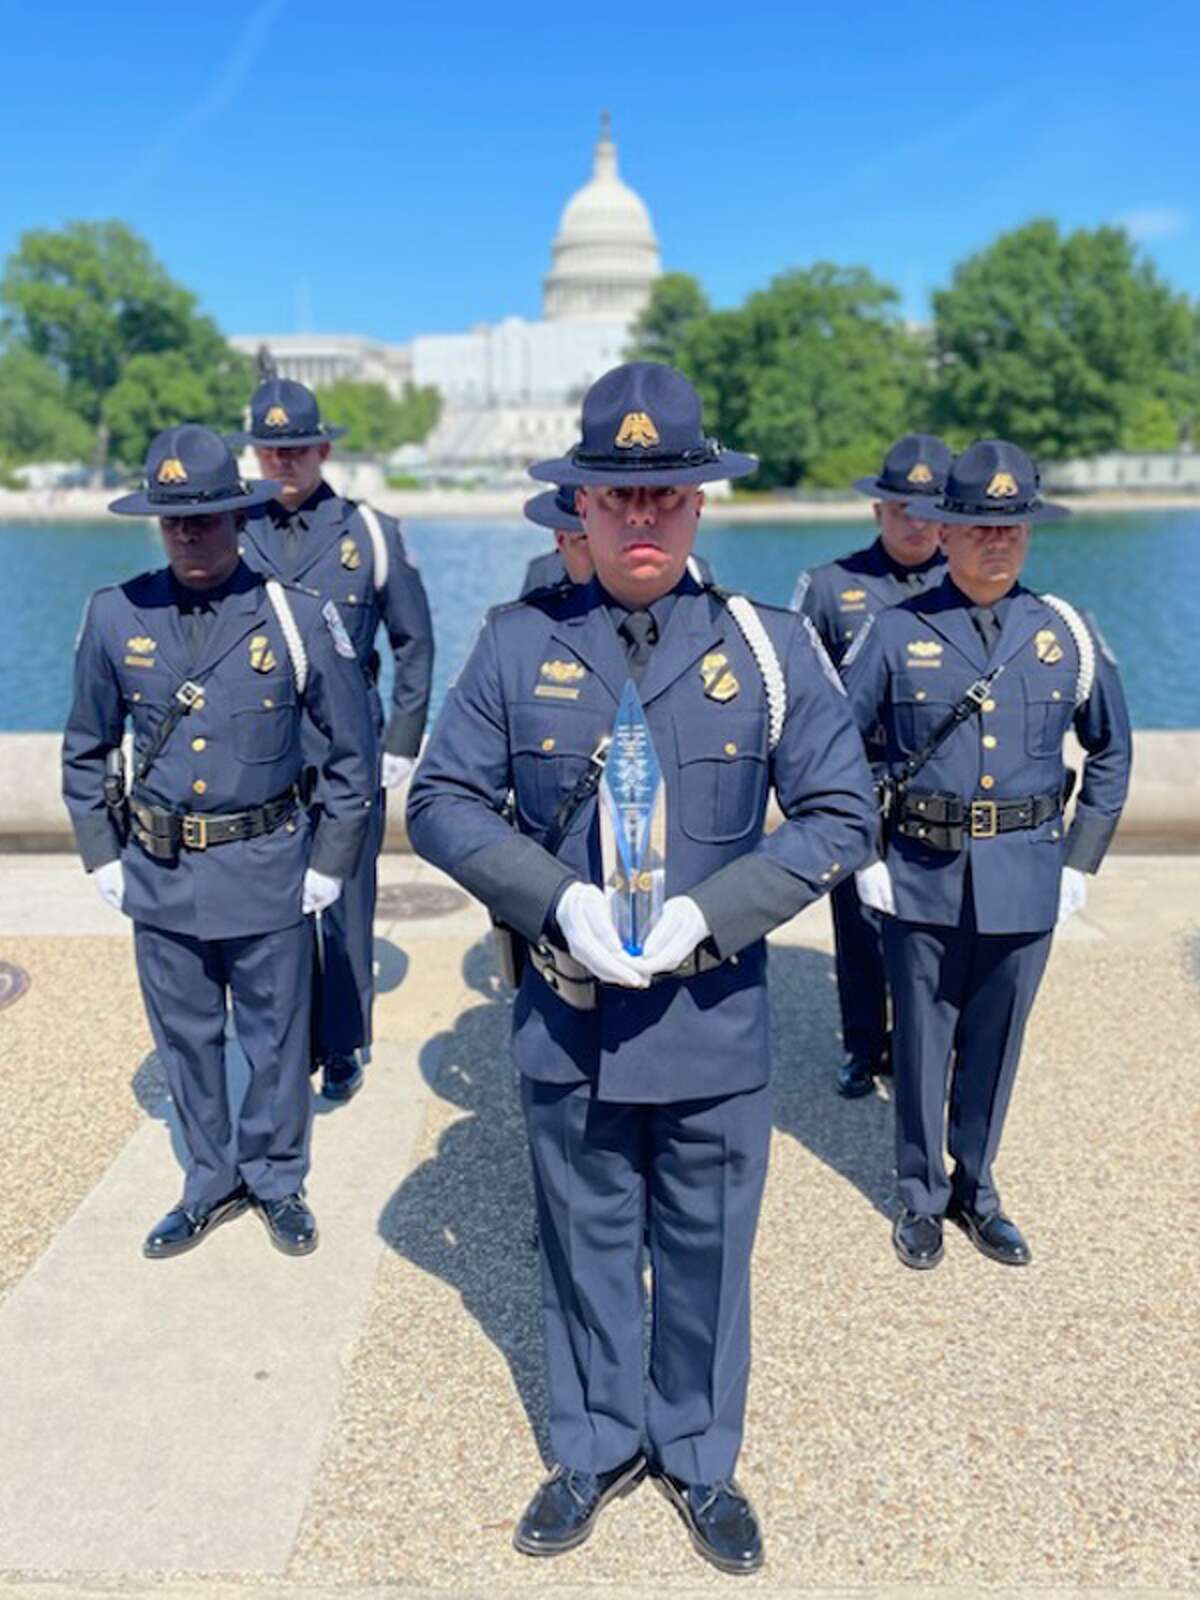 The Laredo CBP Port of Entry Honor Guard Drill Team performed in the prestigious annual Steve Young National Honor Guard competition this week in Washington, D.C. and earned the Chief Judge’s Award.